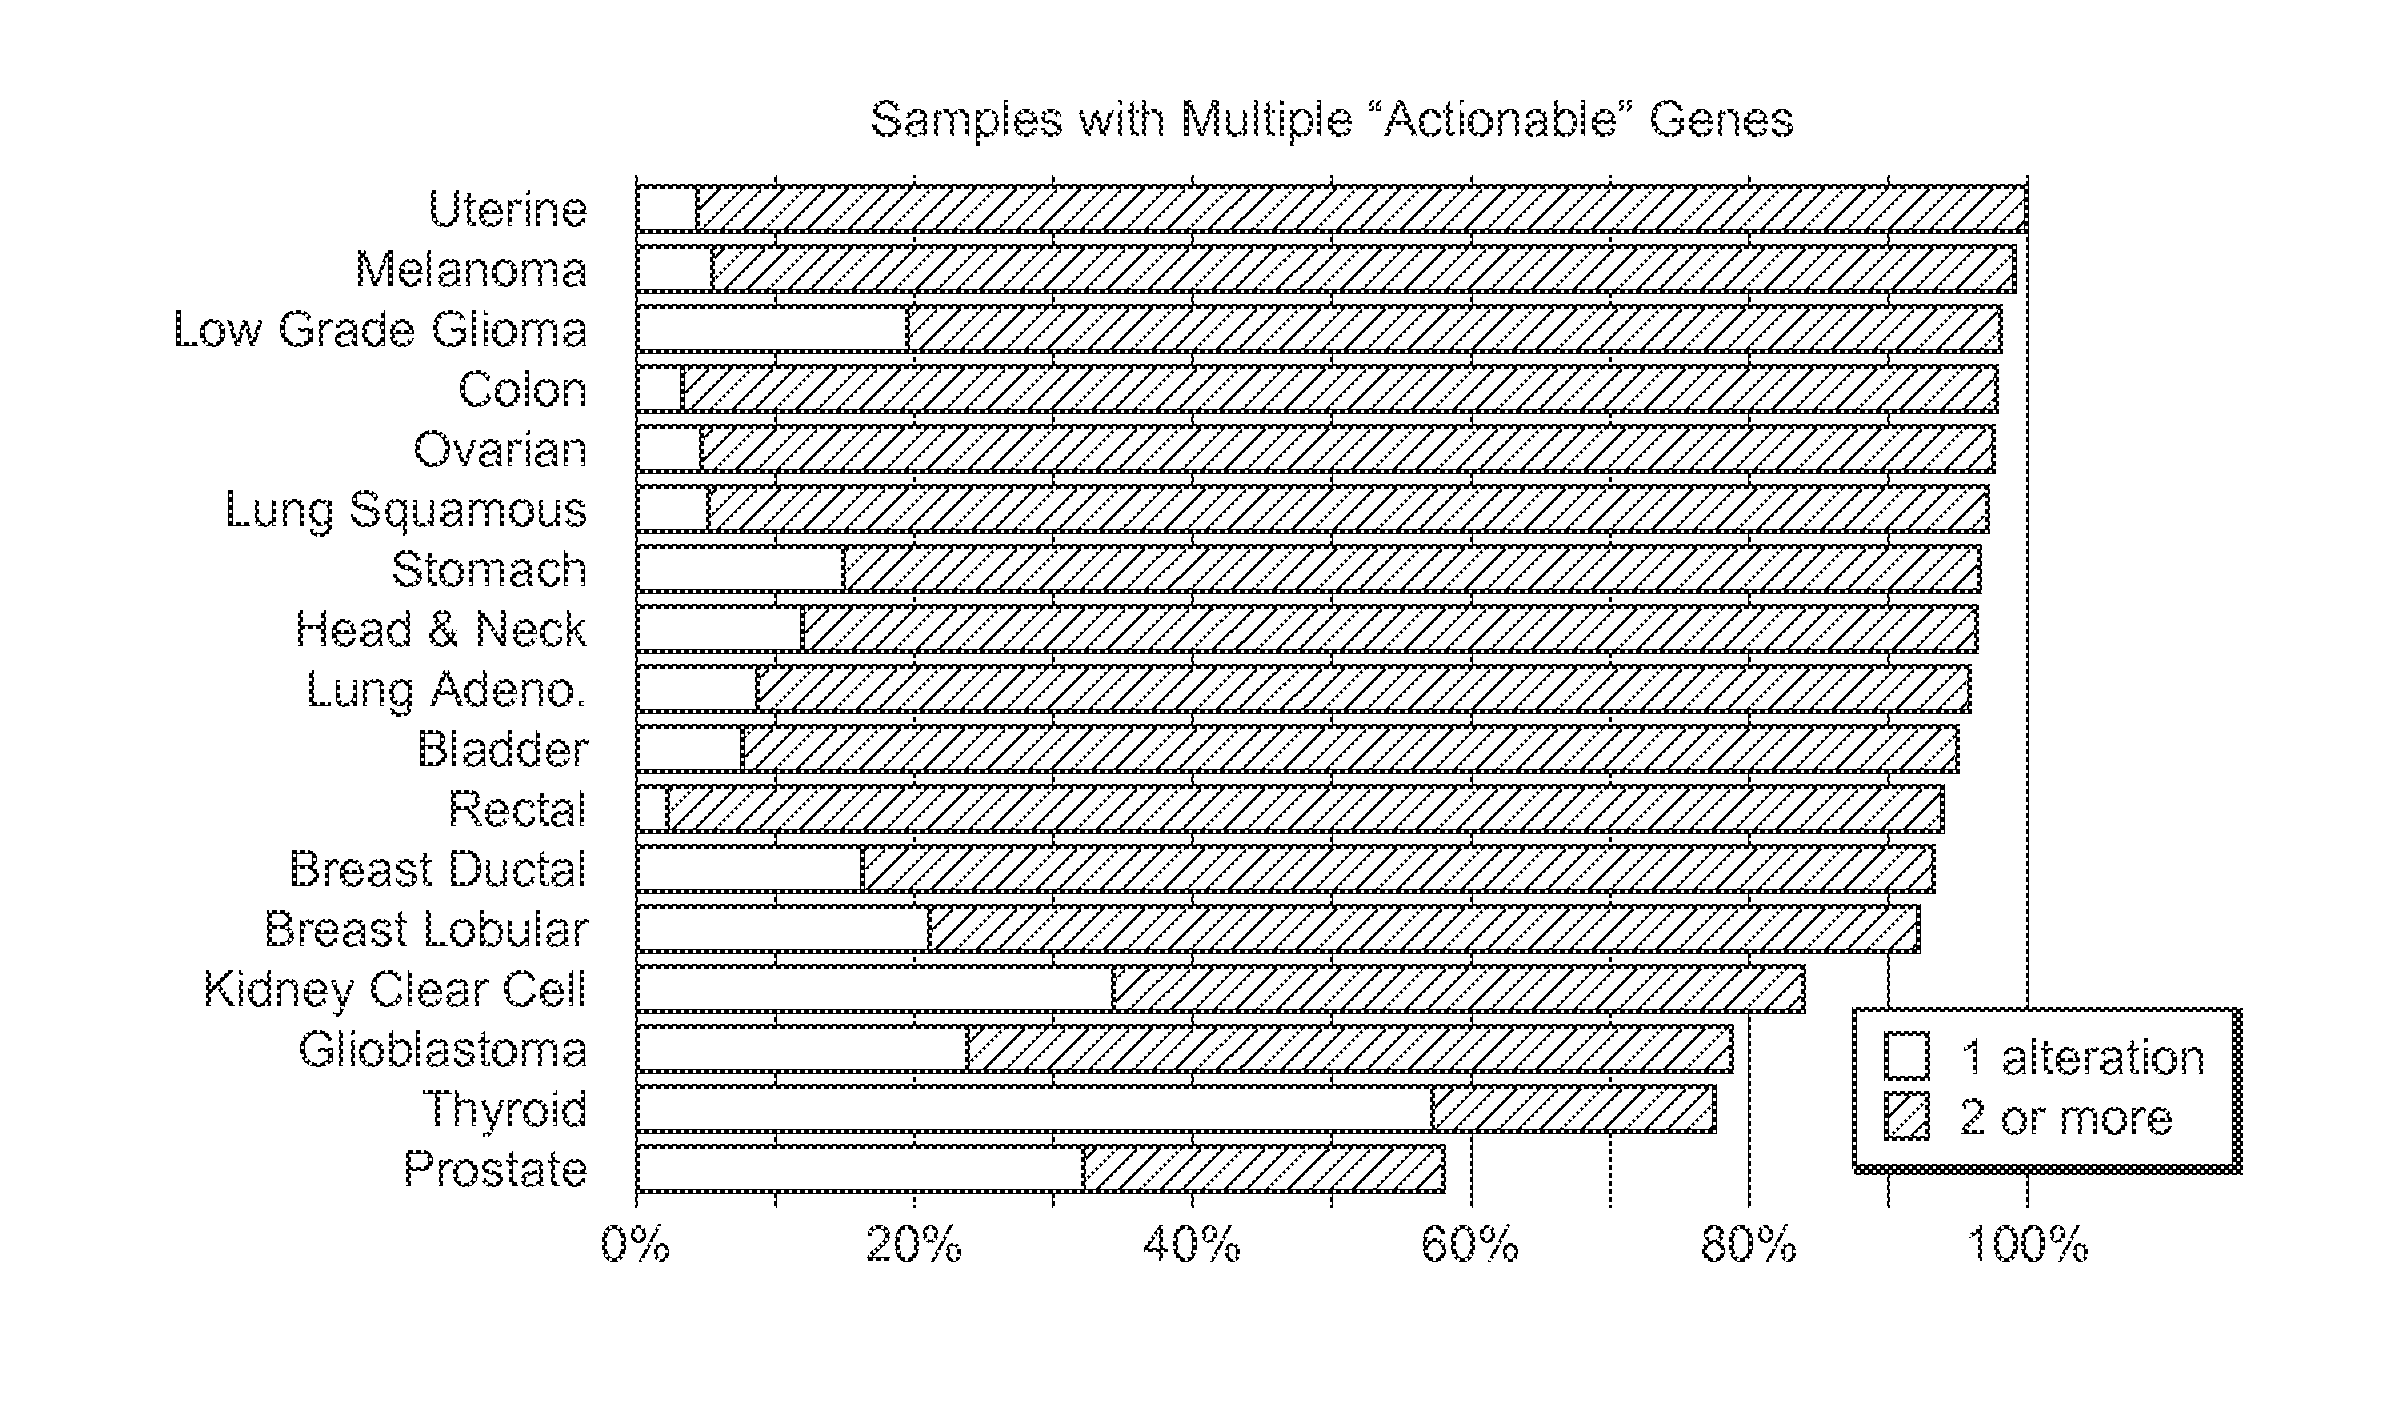 Systems And Methods For Comprehensive Analysis Of Molecular Profiles Across Multiple Tumor And Germline Exomes